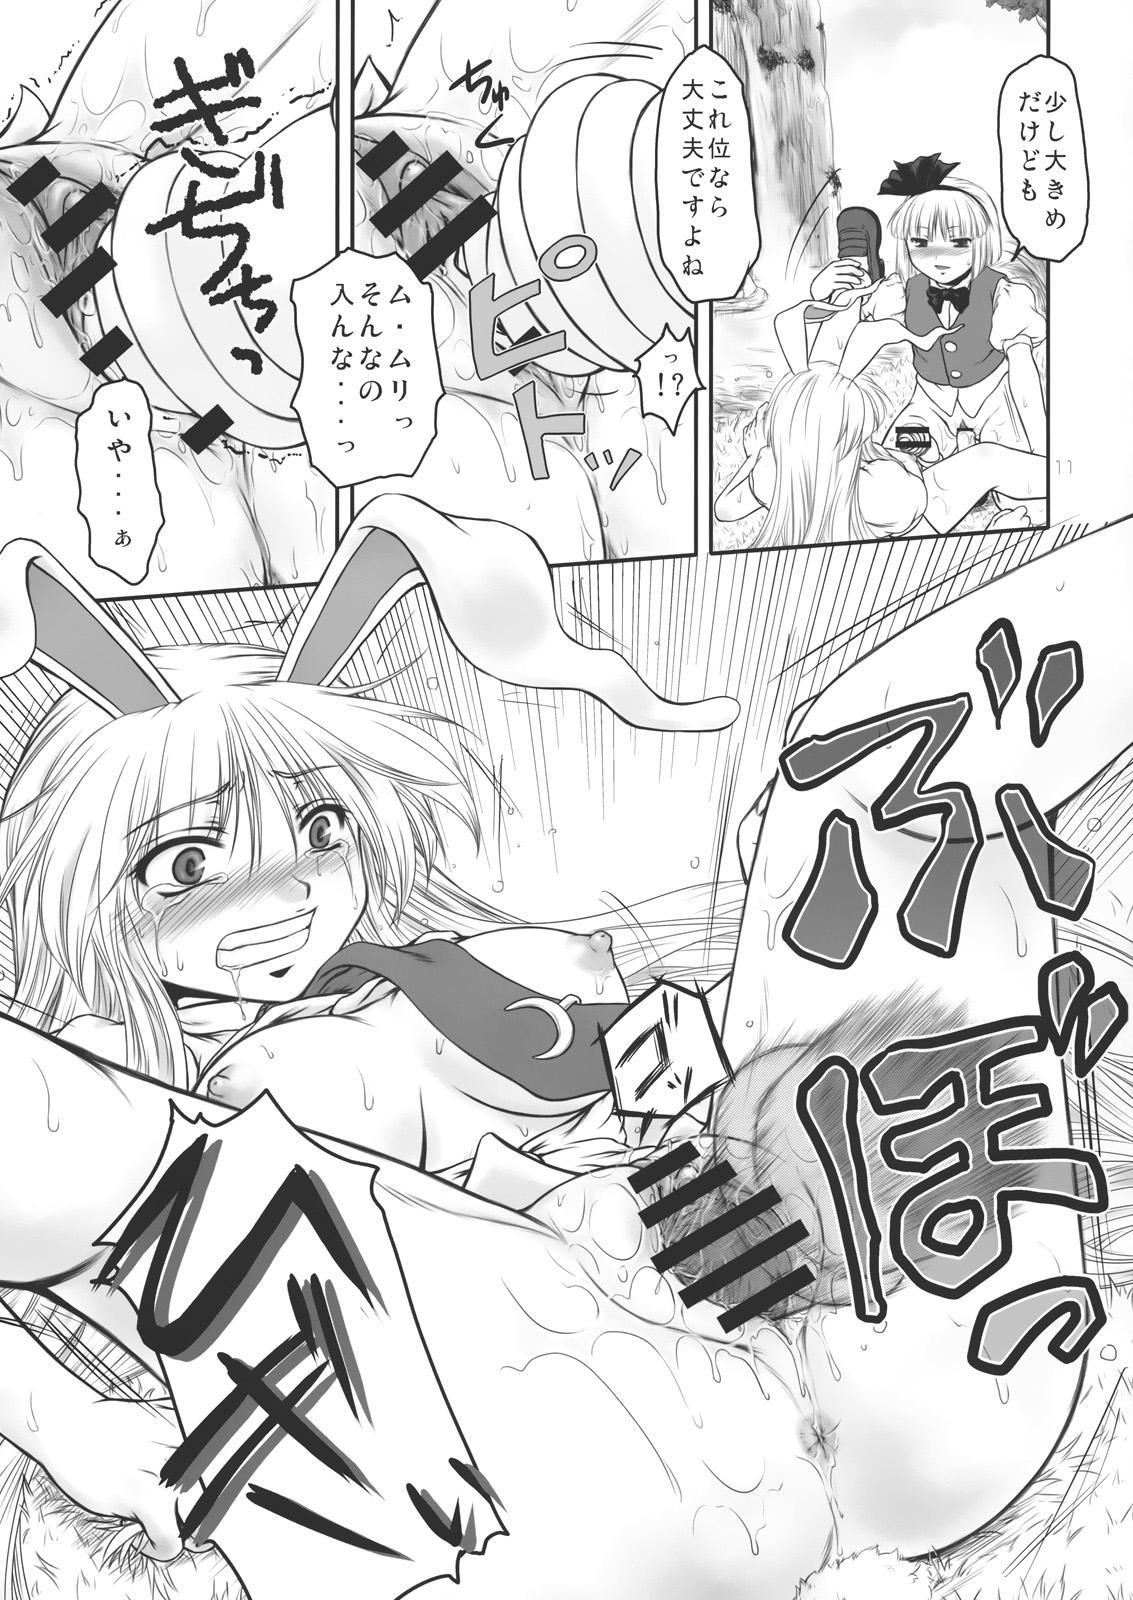 Full Movie Guchoku Immoral - Touhou project Sloppy - Page 11